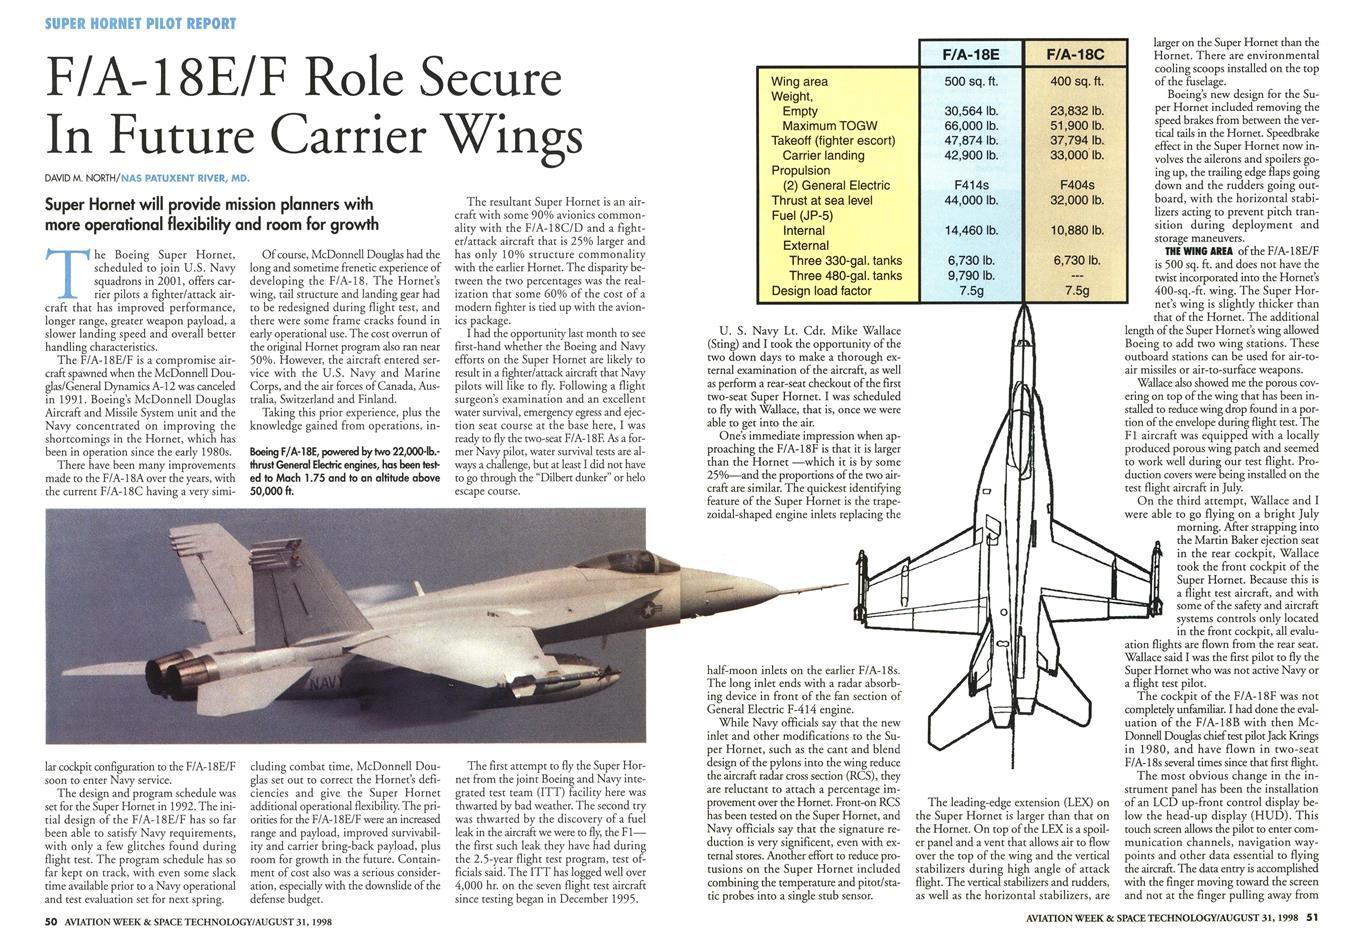 Defense Aircraft Pilot Reports - From The Archives | Aviation Week Network